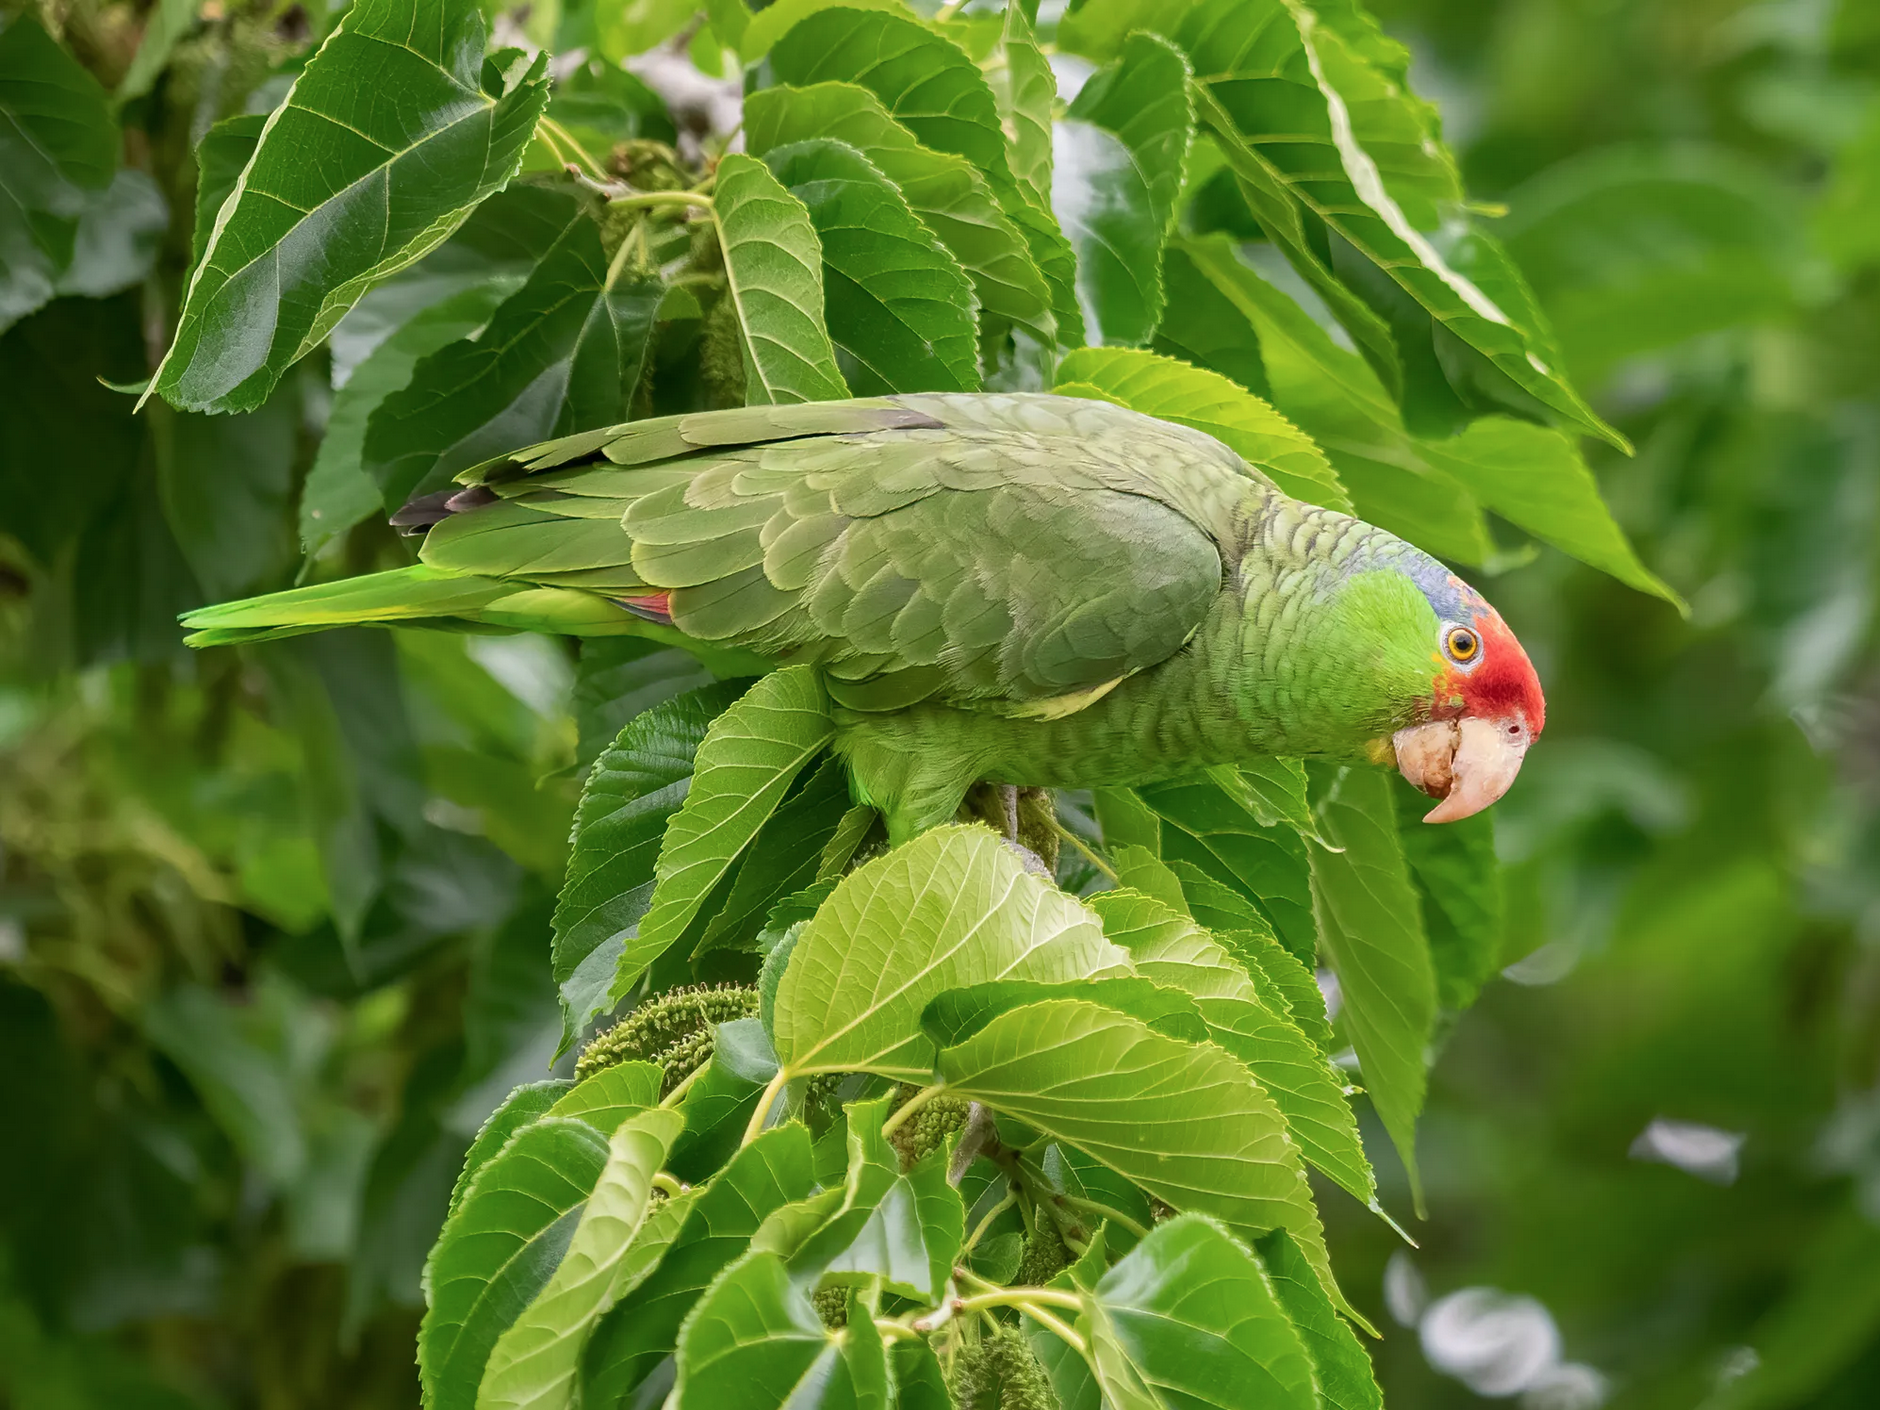 a green parrot with red feathers on it's head sitting in a tree. The tree leaves are the same green as the parrot.